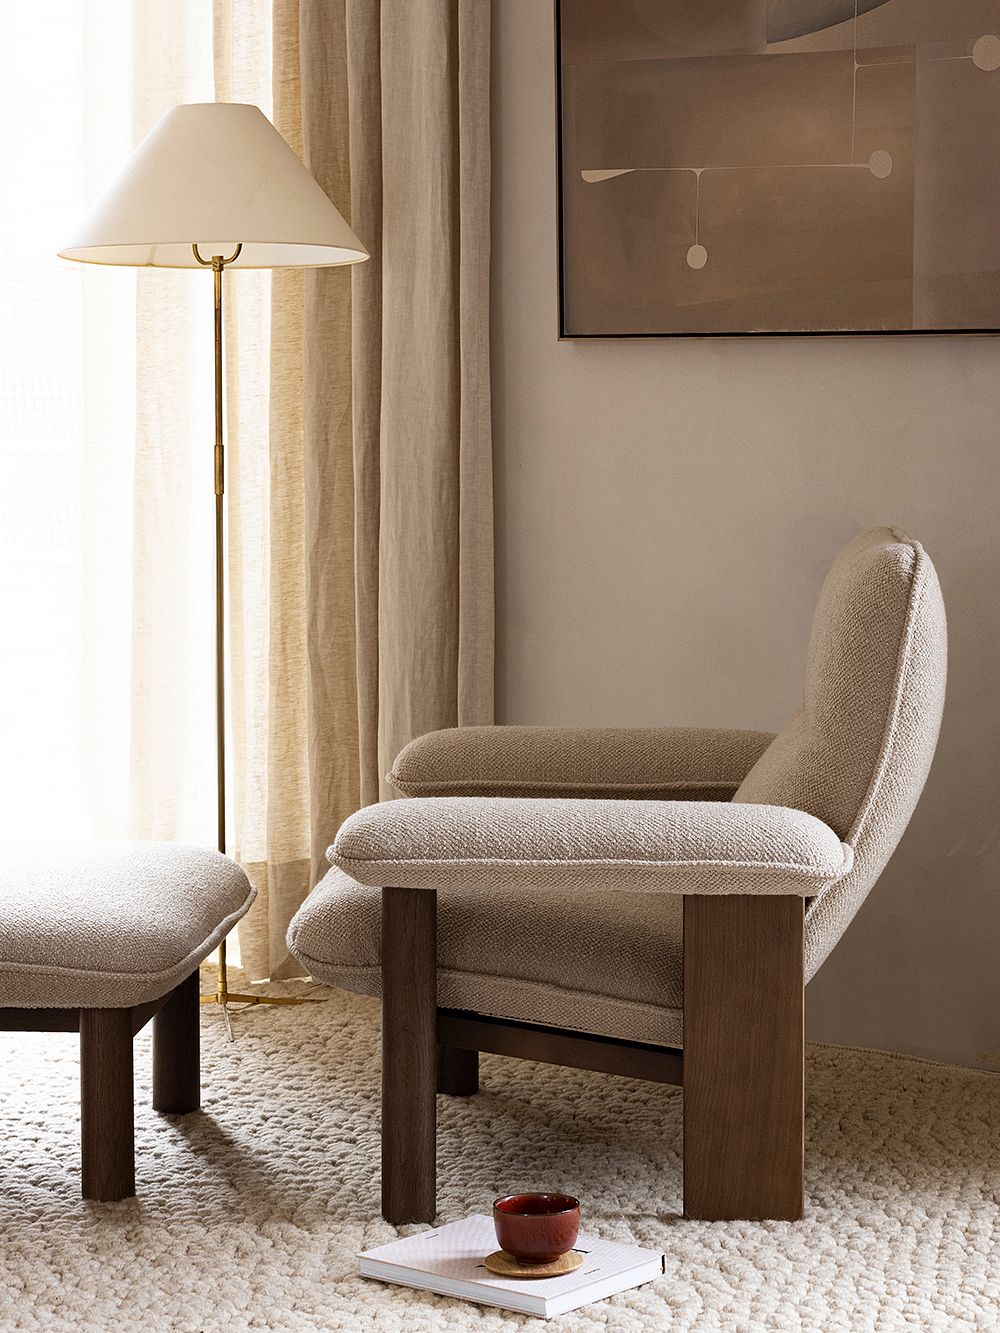 An image of Menu's Brasilia armchair and ottoman in a livingroom.